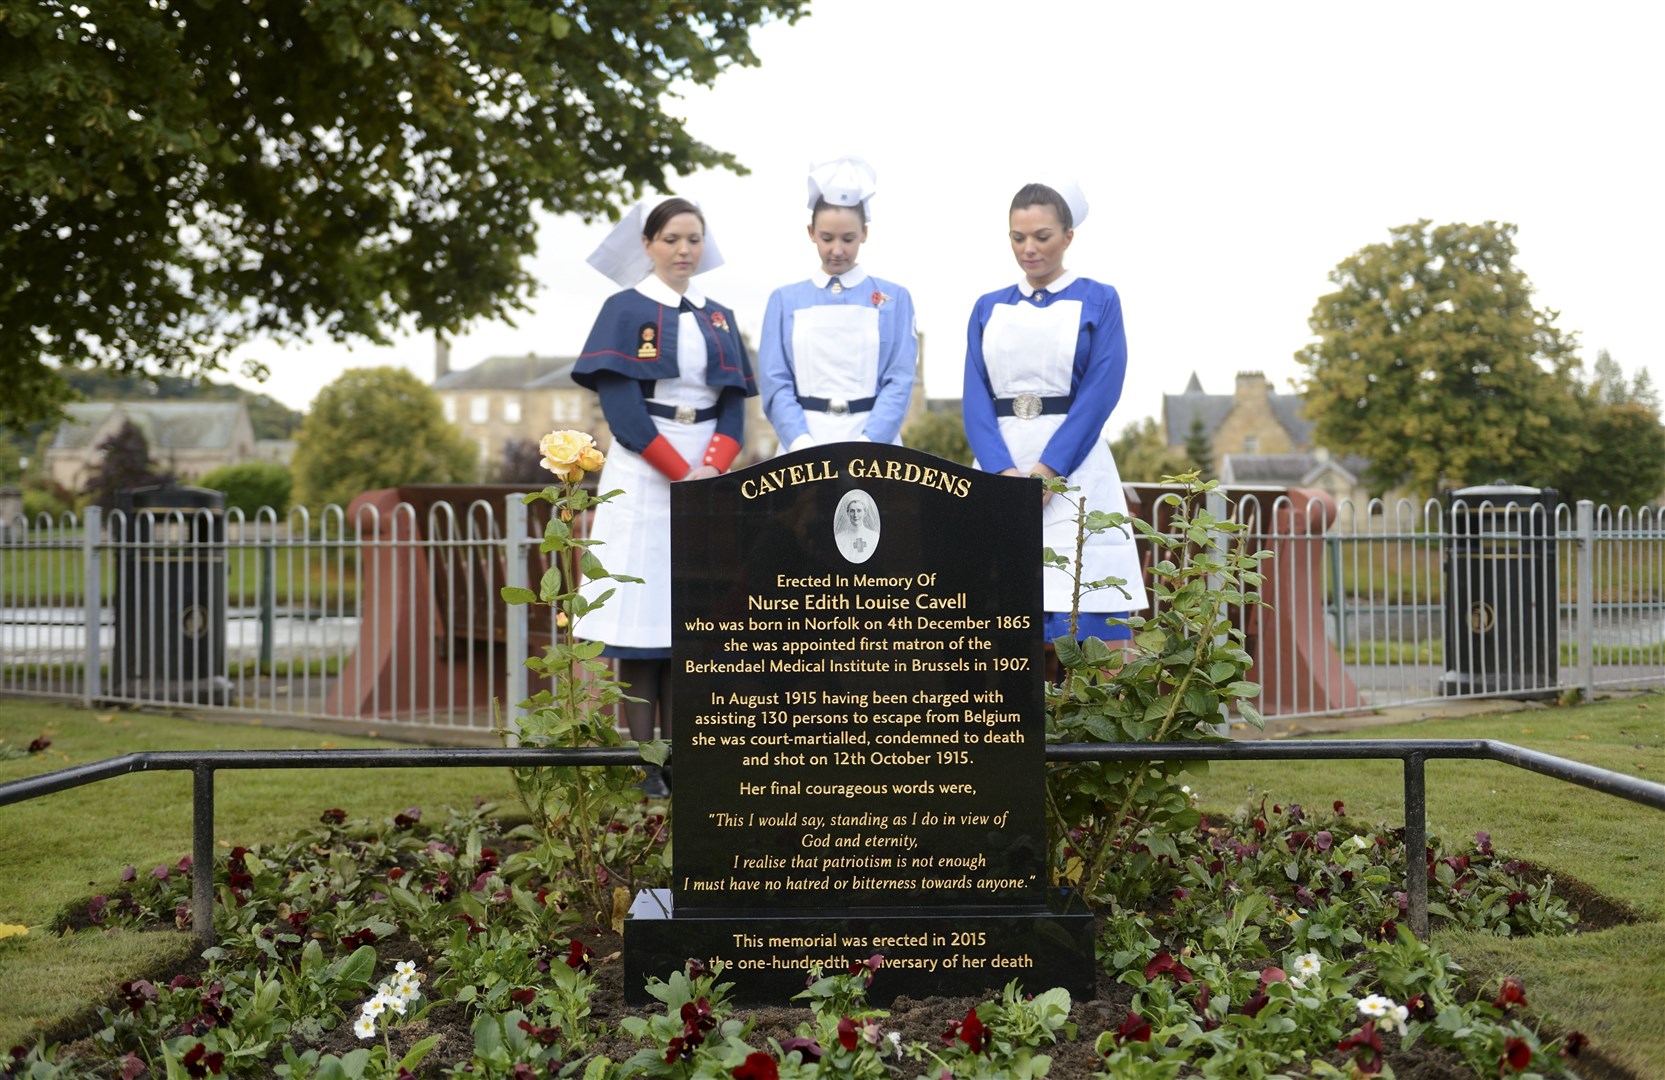 Raigmore hospital nurses in period uniform when new memorial to Edith Cavell was unveiled.